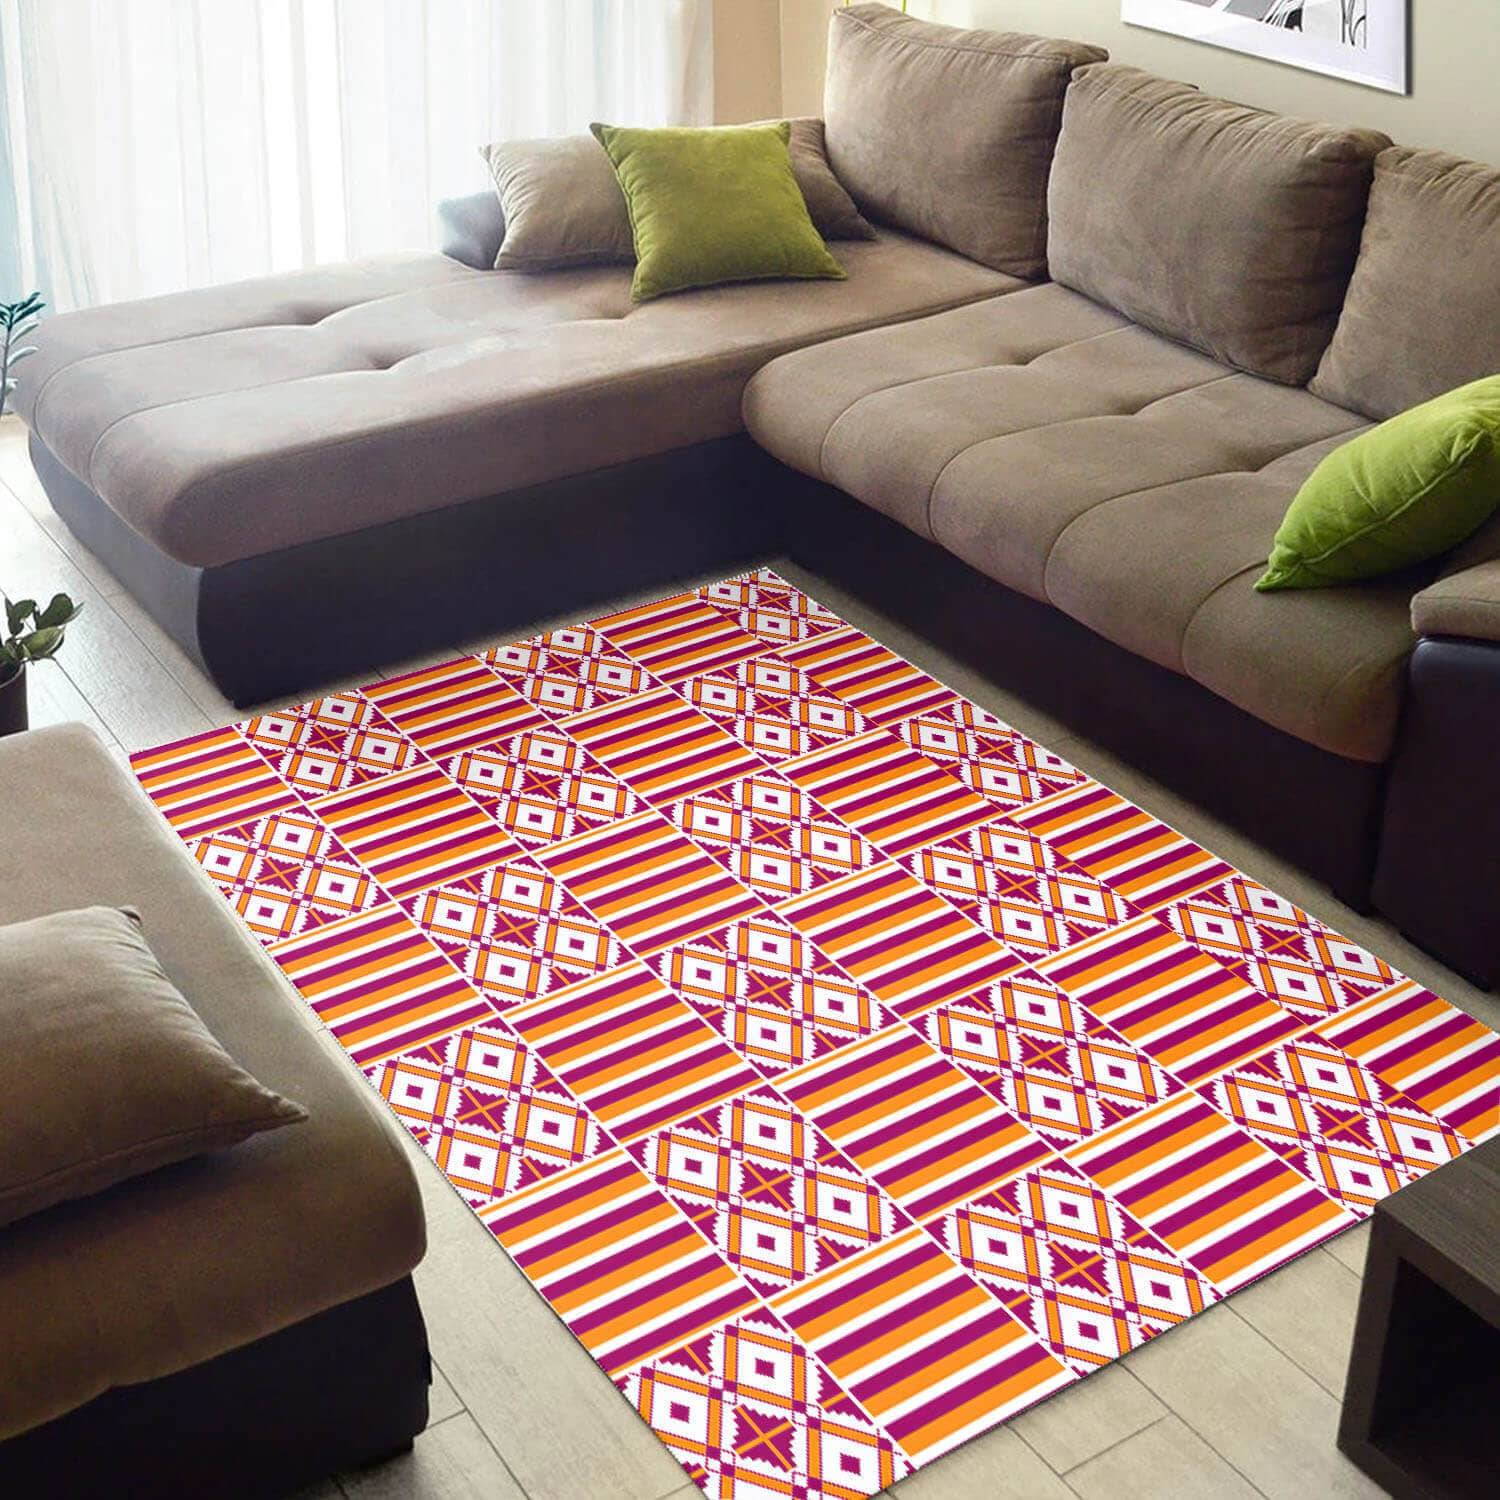 Cool African Nice American Black Art Afrocentric Pattern Themed Carpet Style Rug